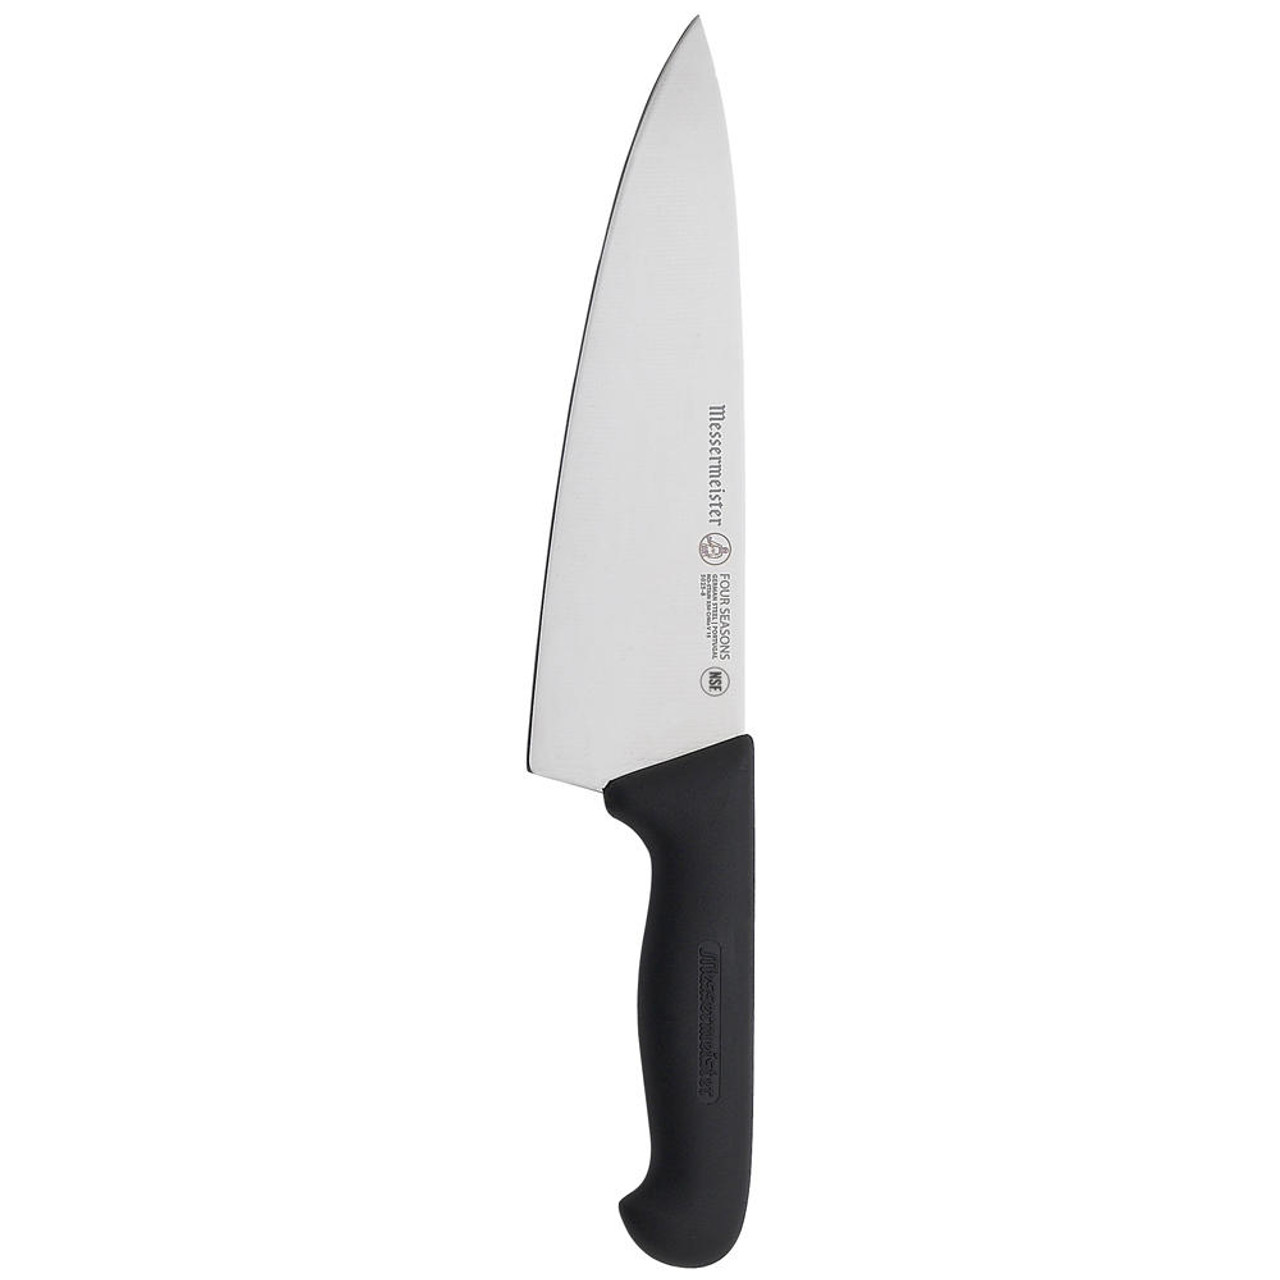 https://cdn11.bigcommerce.com/s-k3c8jdz2s4/images/stencil/1280w/products/2935/3109/messermeister-four-seasons-pro-series-8-inch-chefs-knife-wide-blade-5025-8__84974.1657173935.jpg